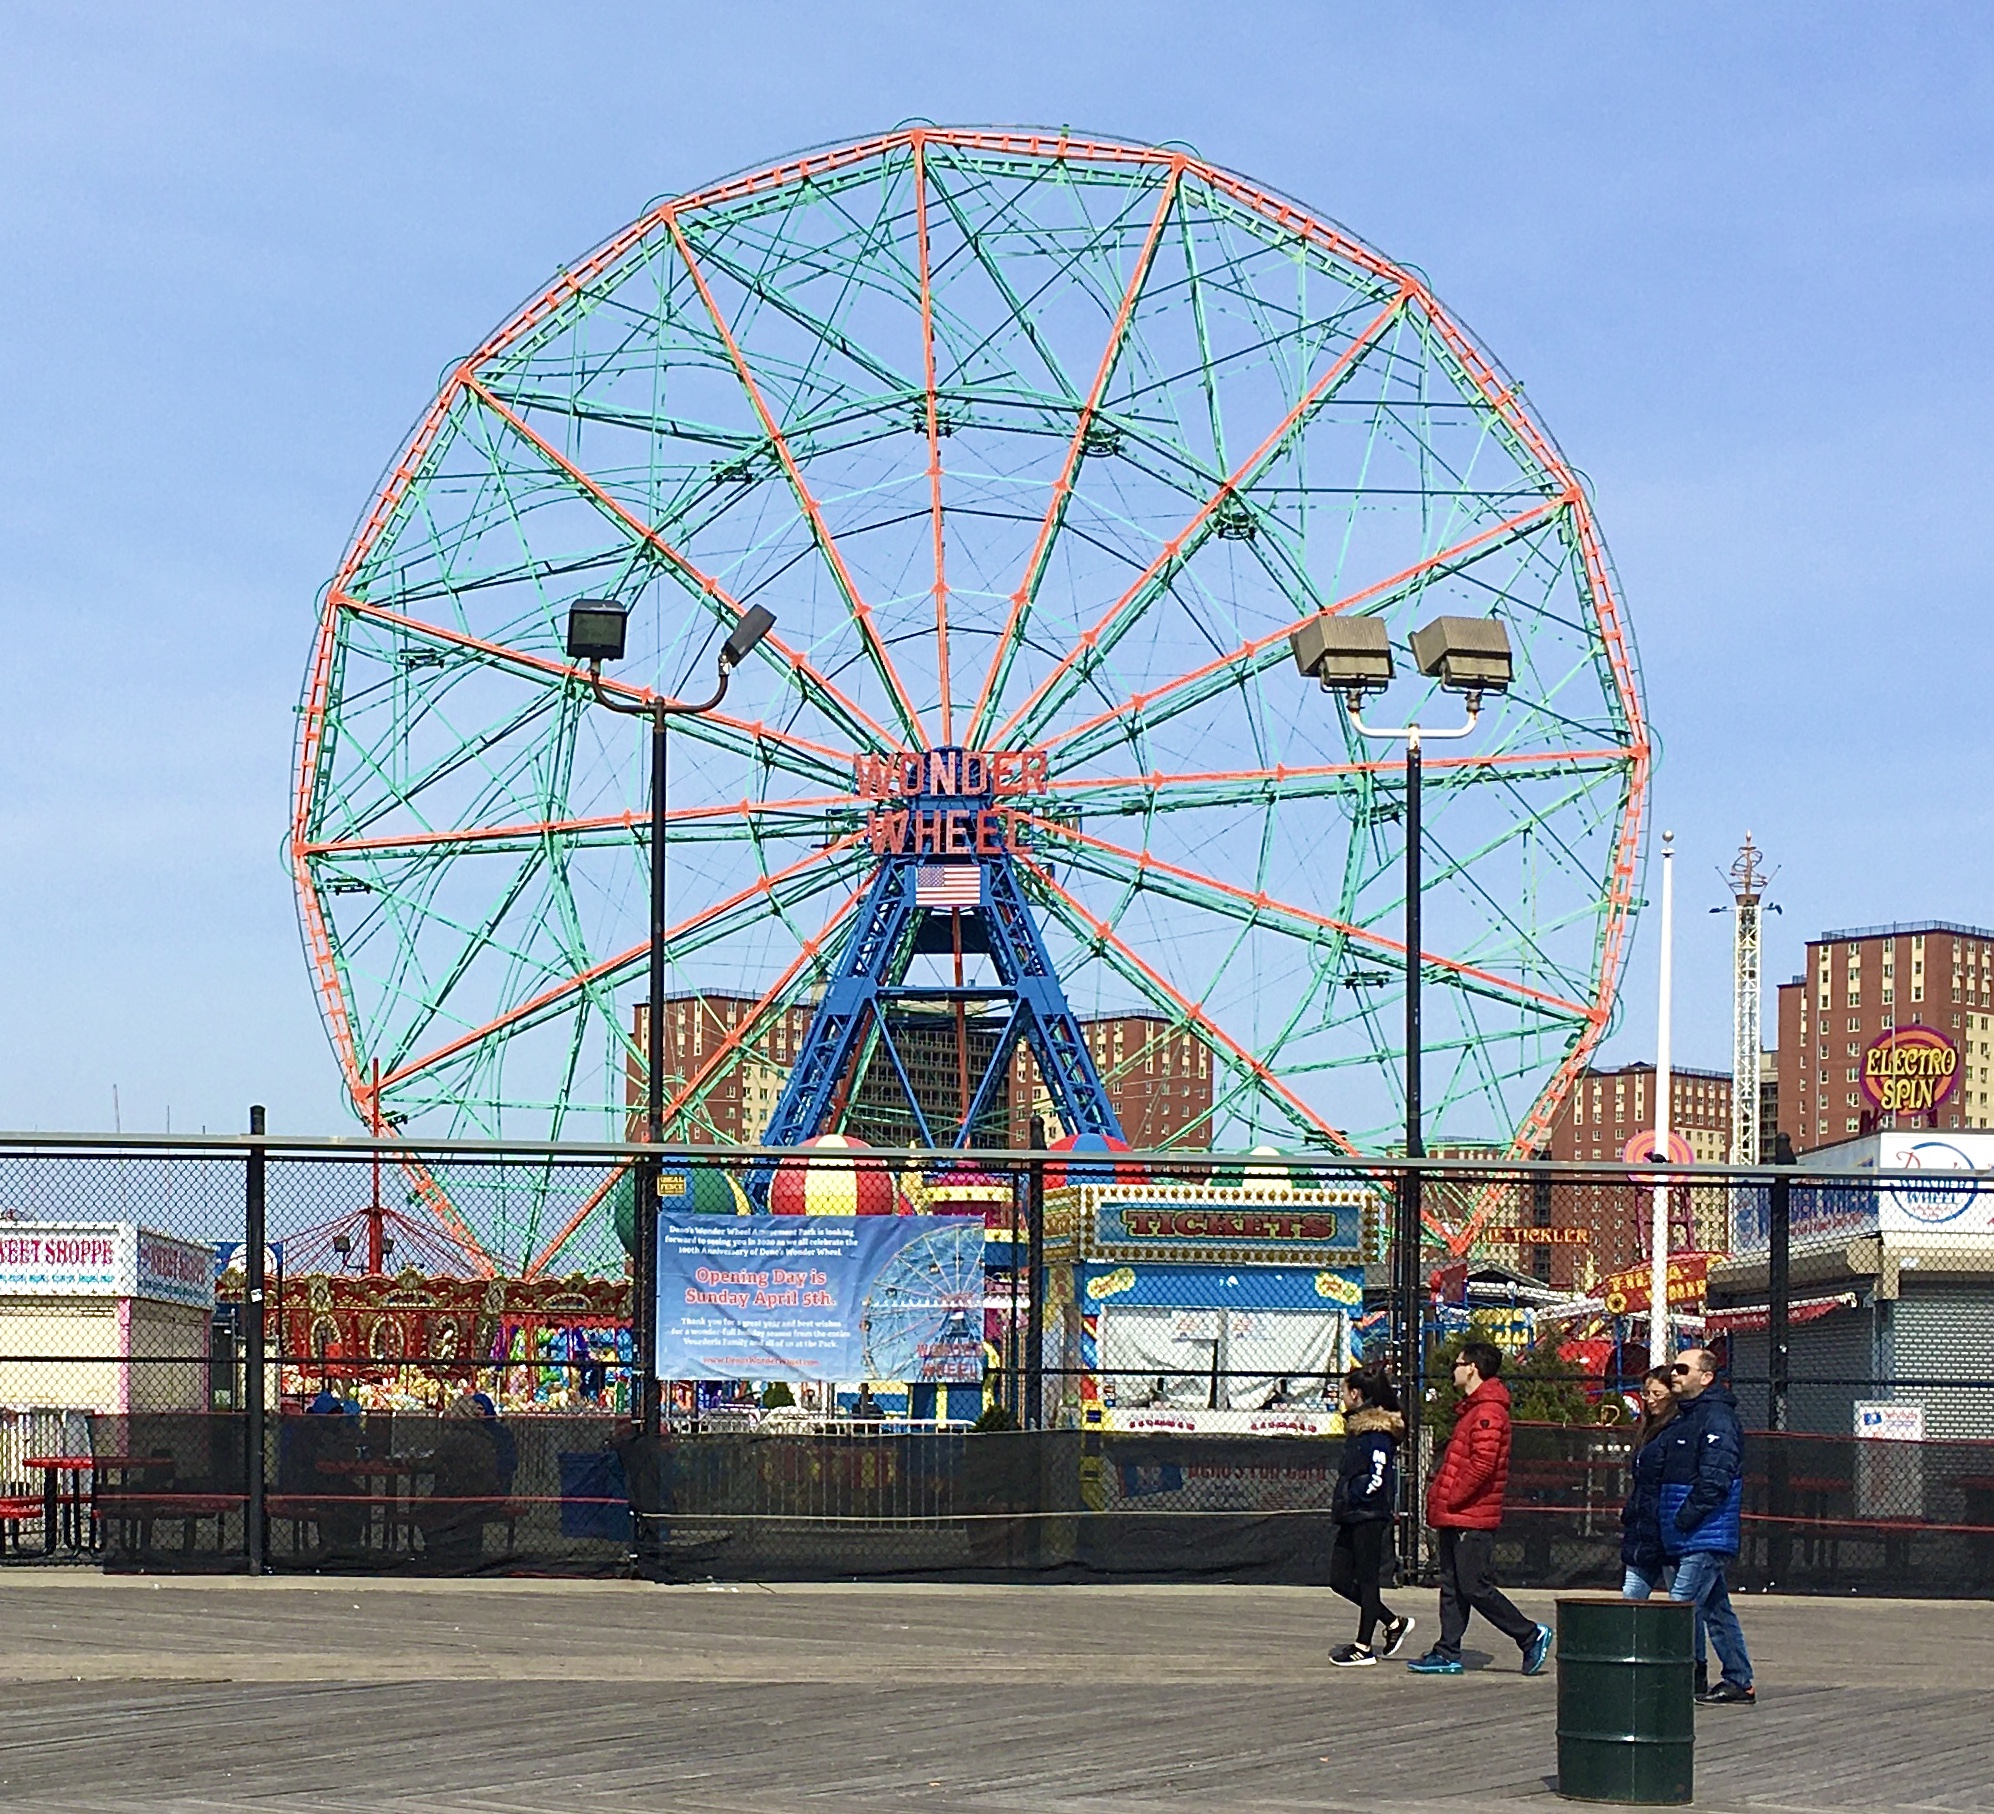 The iconic Wonder Wheel brightens this bit of the Boardwalk. Photo: Lore Croghan/Brooklyn Eagle